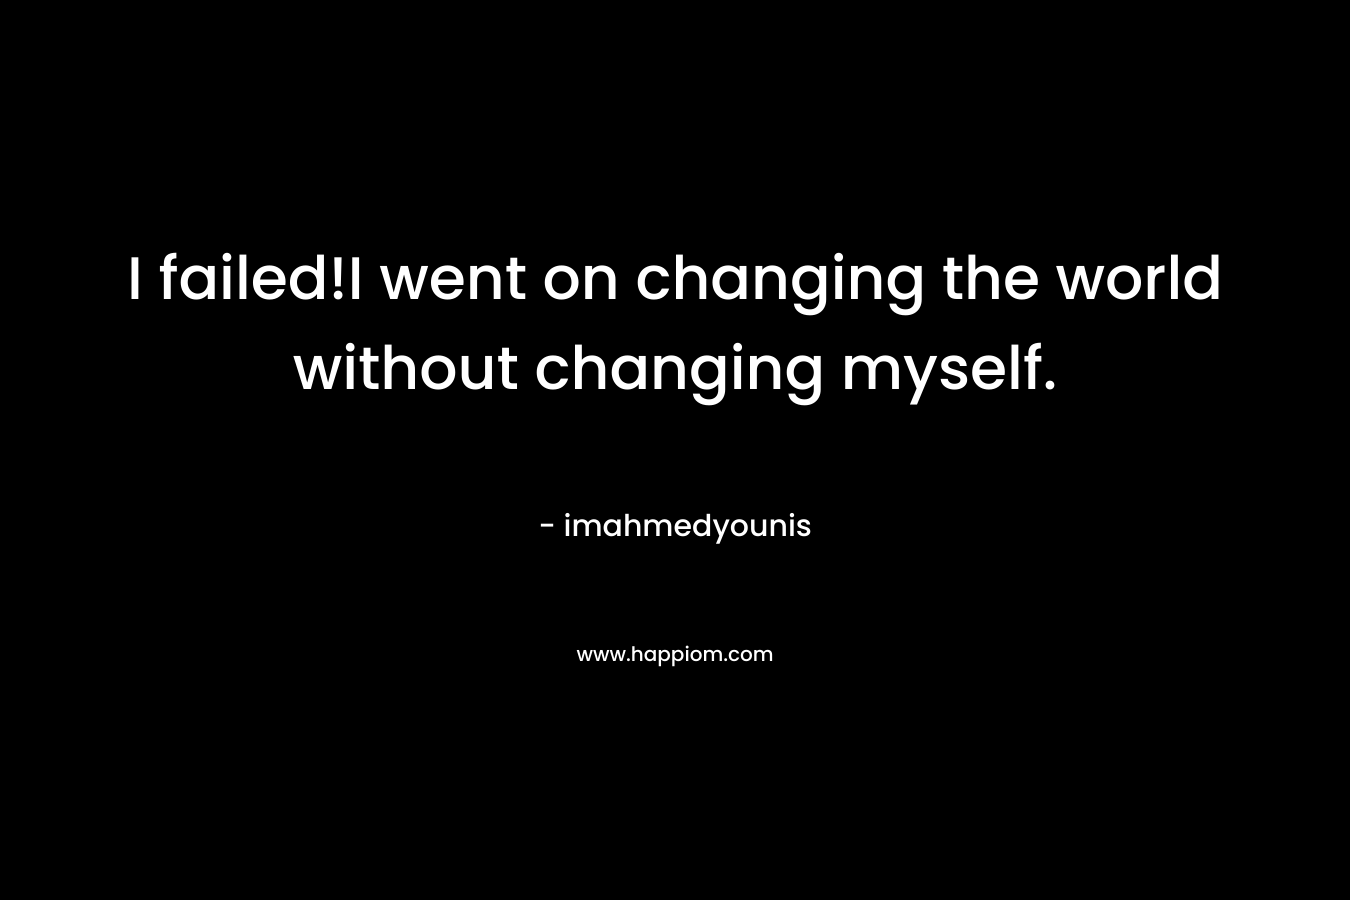 I failed!I went on changing the world without changing myself.